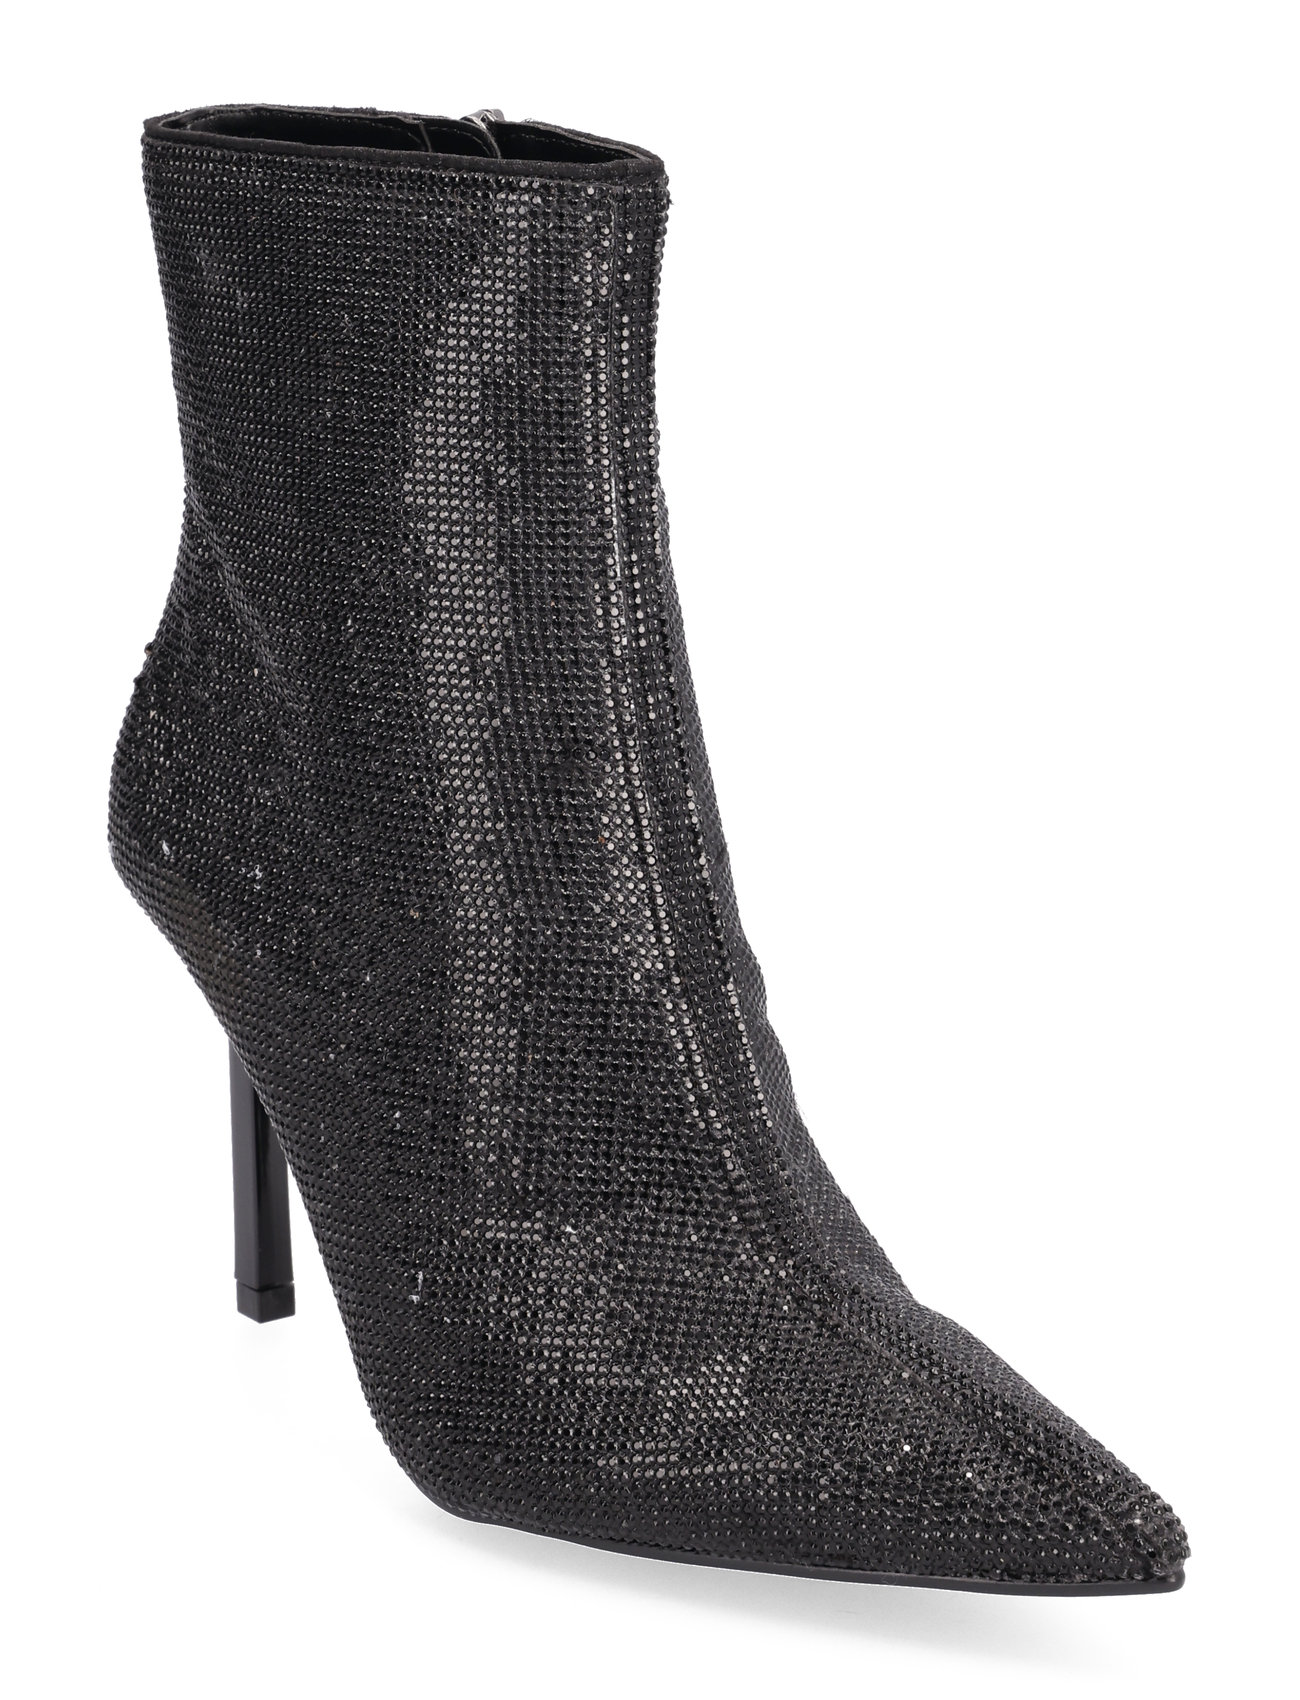 Iyanna-R Bootie Shoes Boots Ankle Boots Ankle Boots With Heel Black Steve Madden